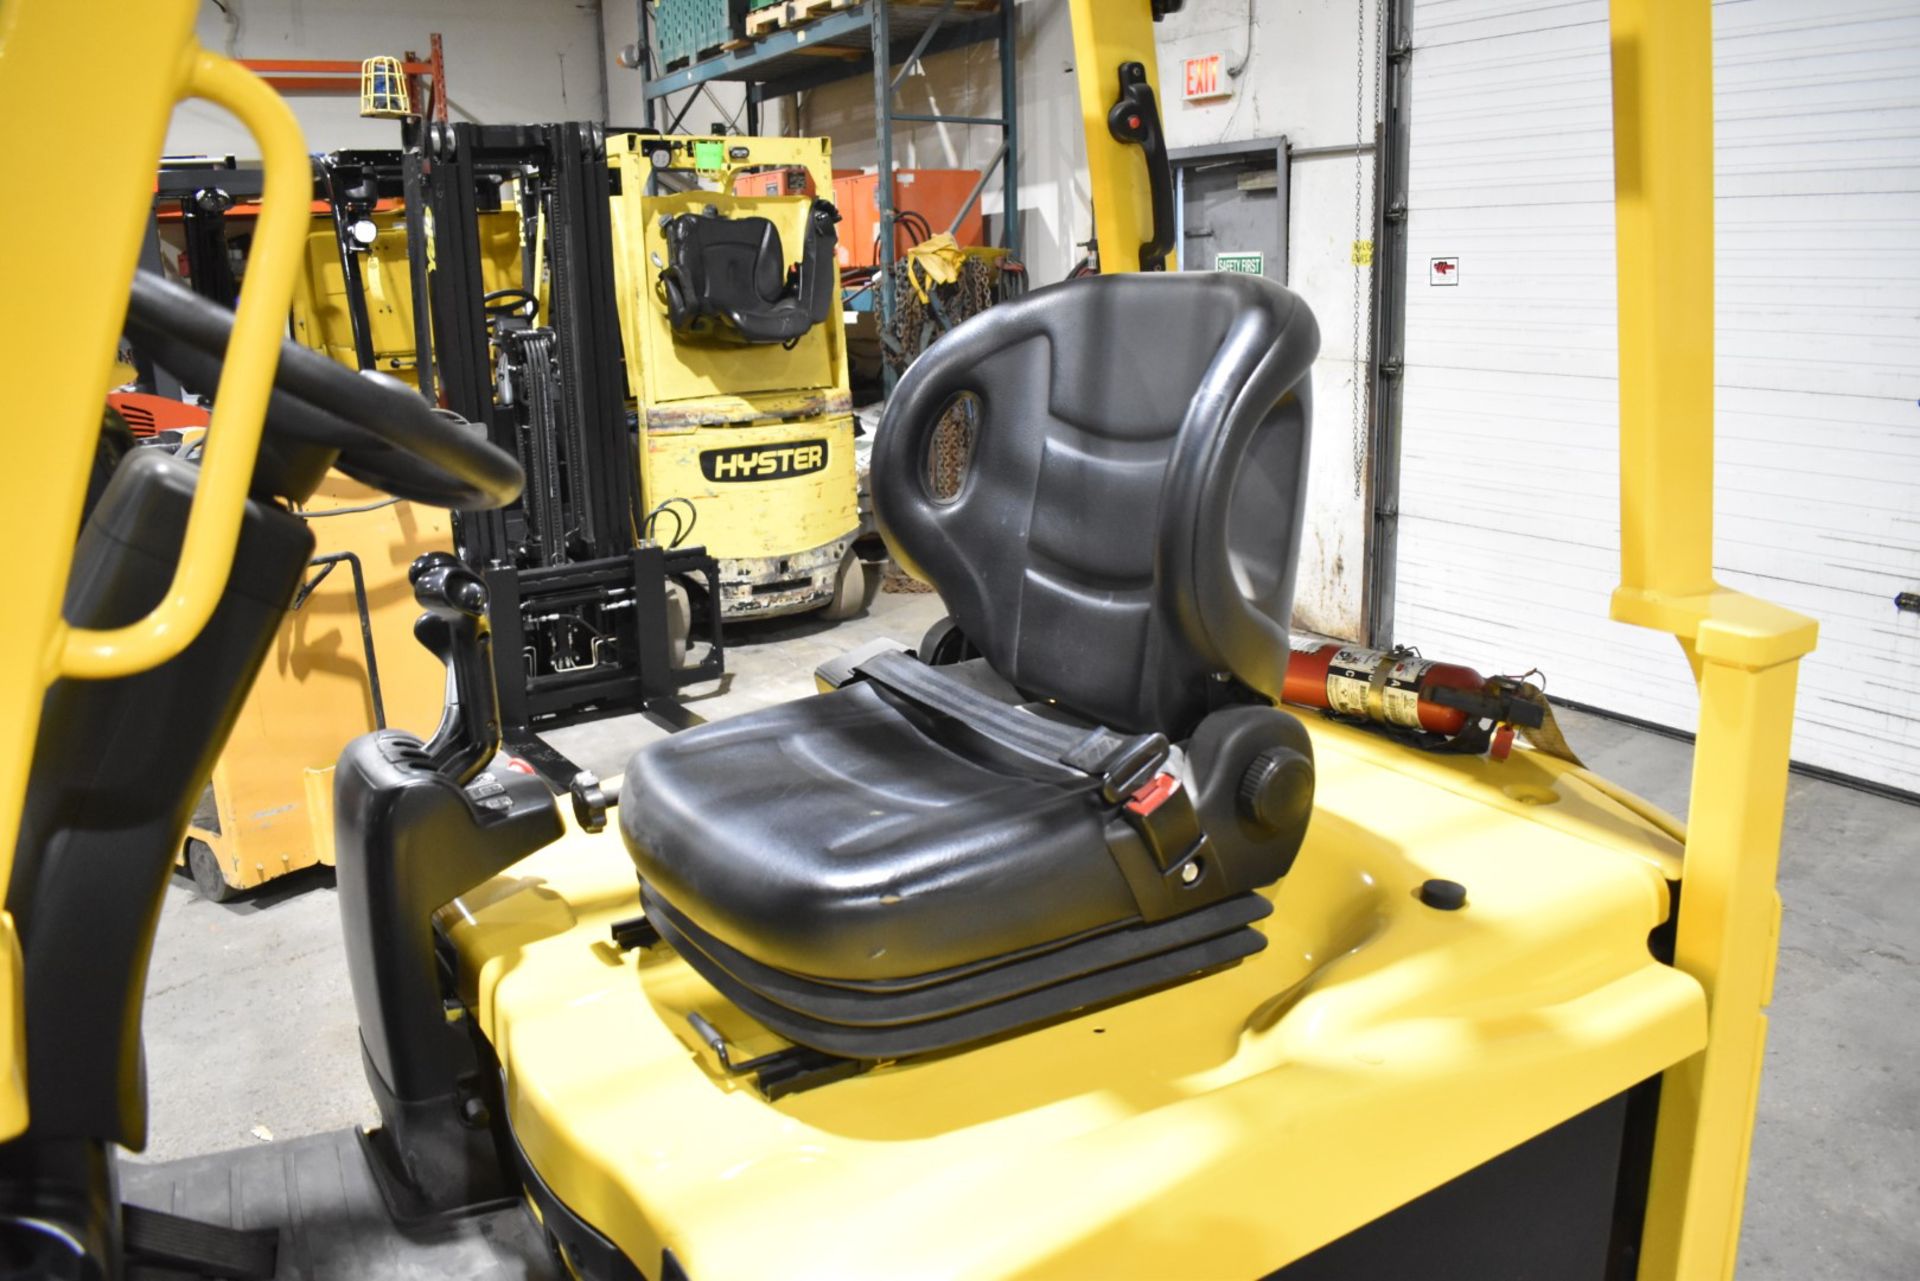 HYSTER (2018) E50XN-33 ELECTRIC FORKLIFT WITH 4350LBS CAPACITY, 48V BATTERY, 300" MAX LIFTING - Image 5 of 8